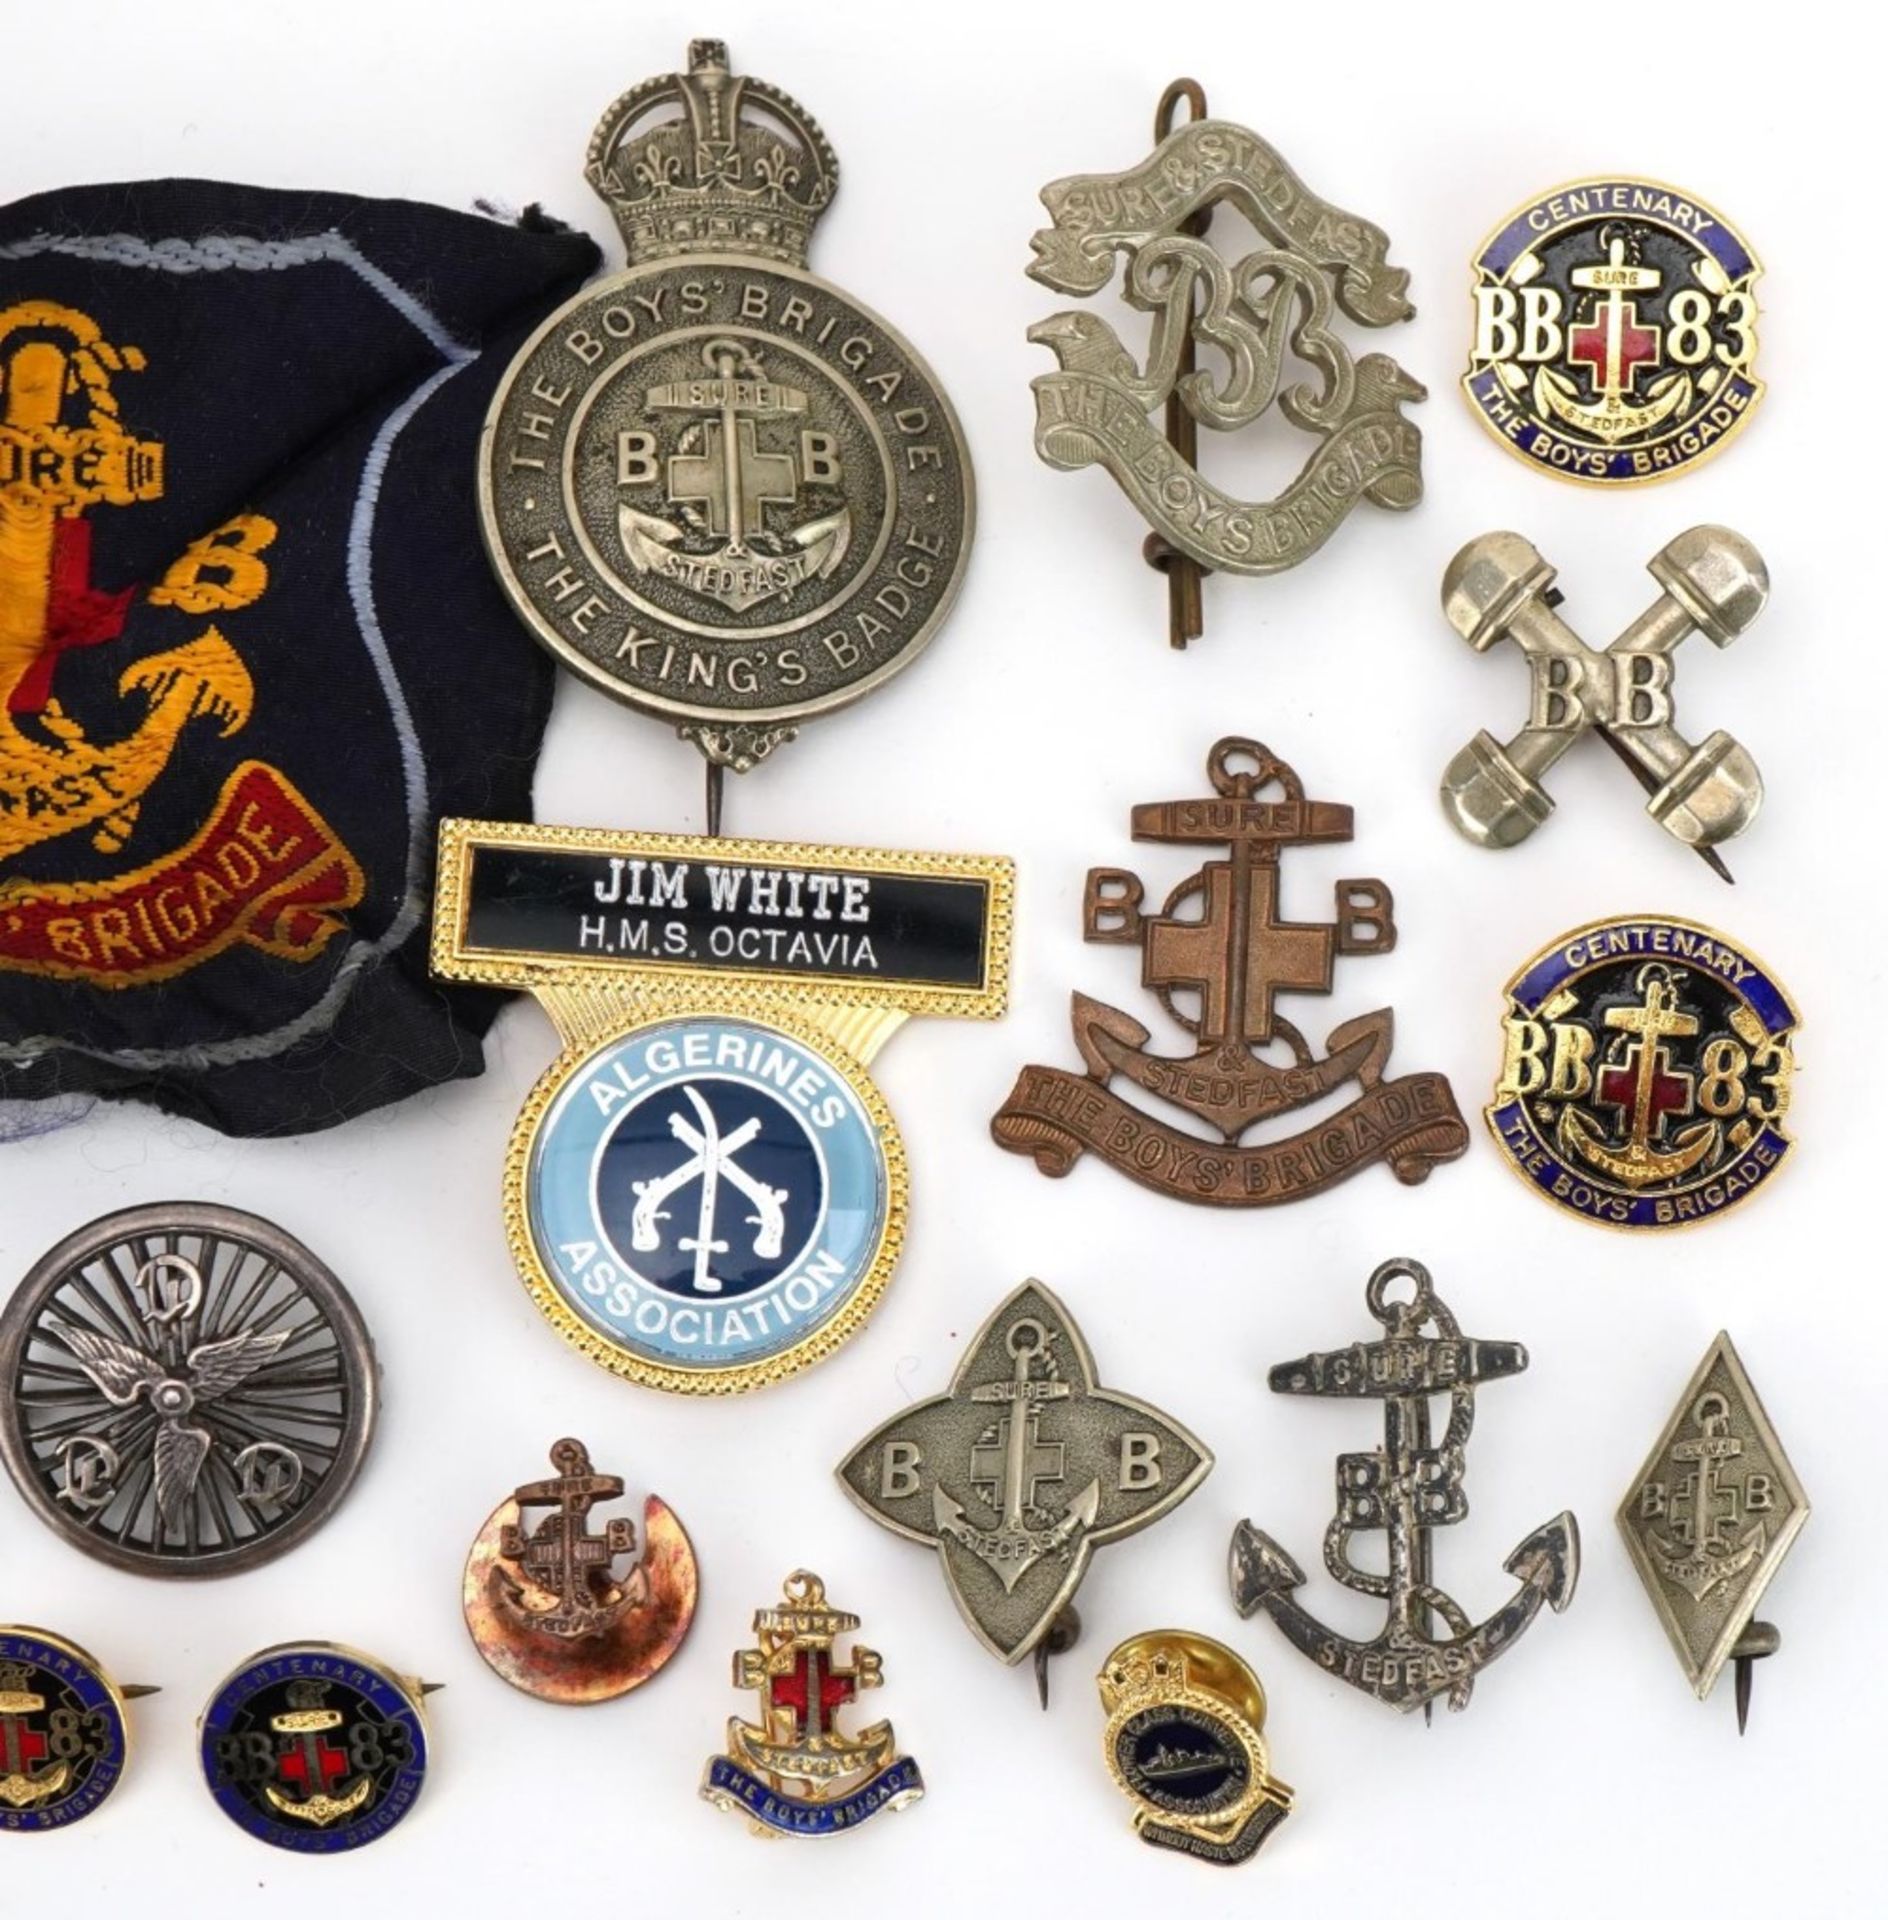 Predominantly Boy's Brigade memorabilia including a silver and enamel jewel, badges and a cycling - Image 3 of 4